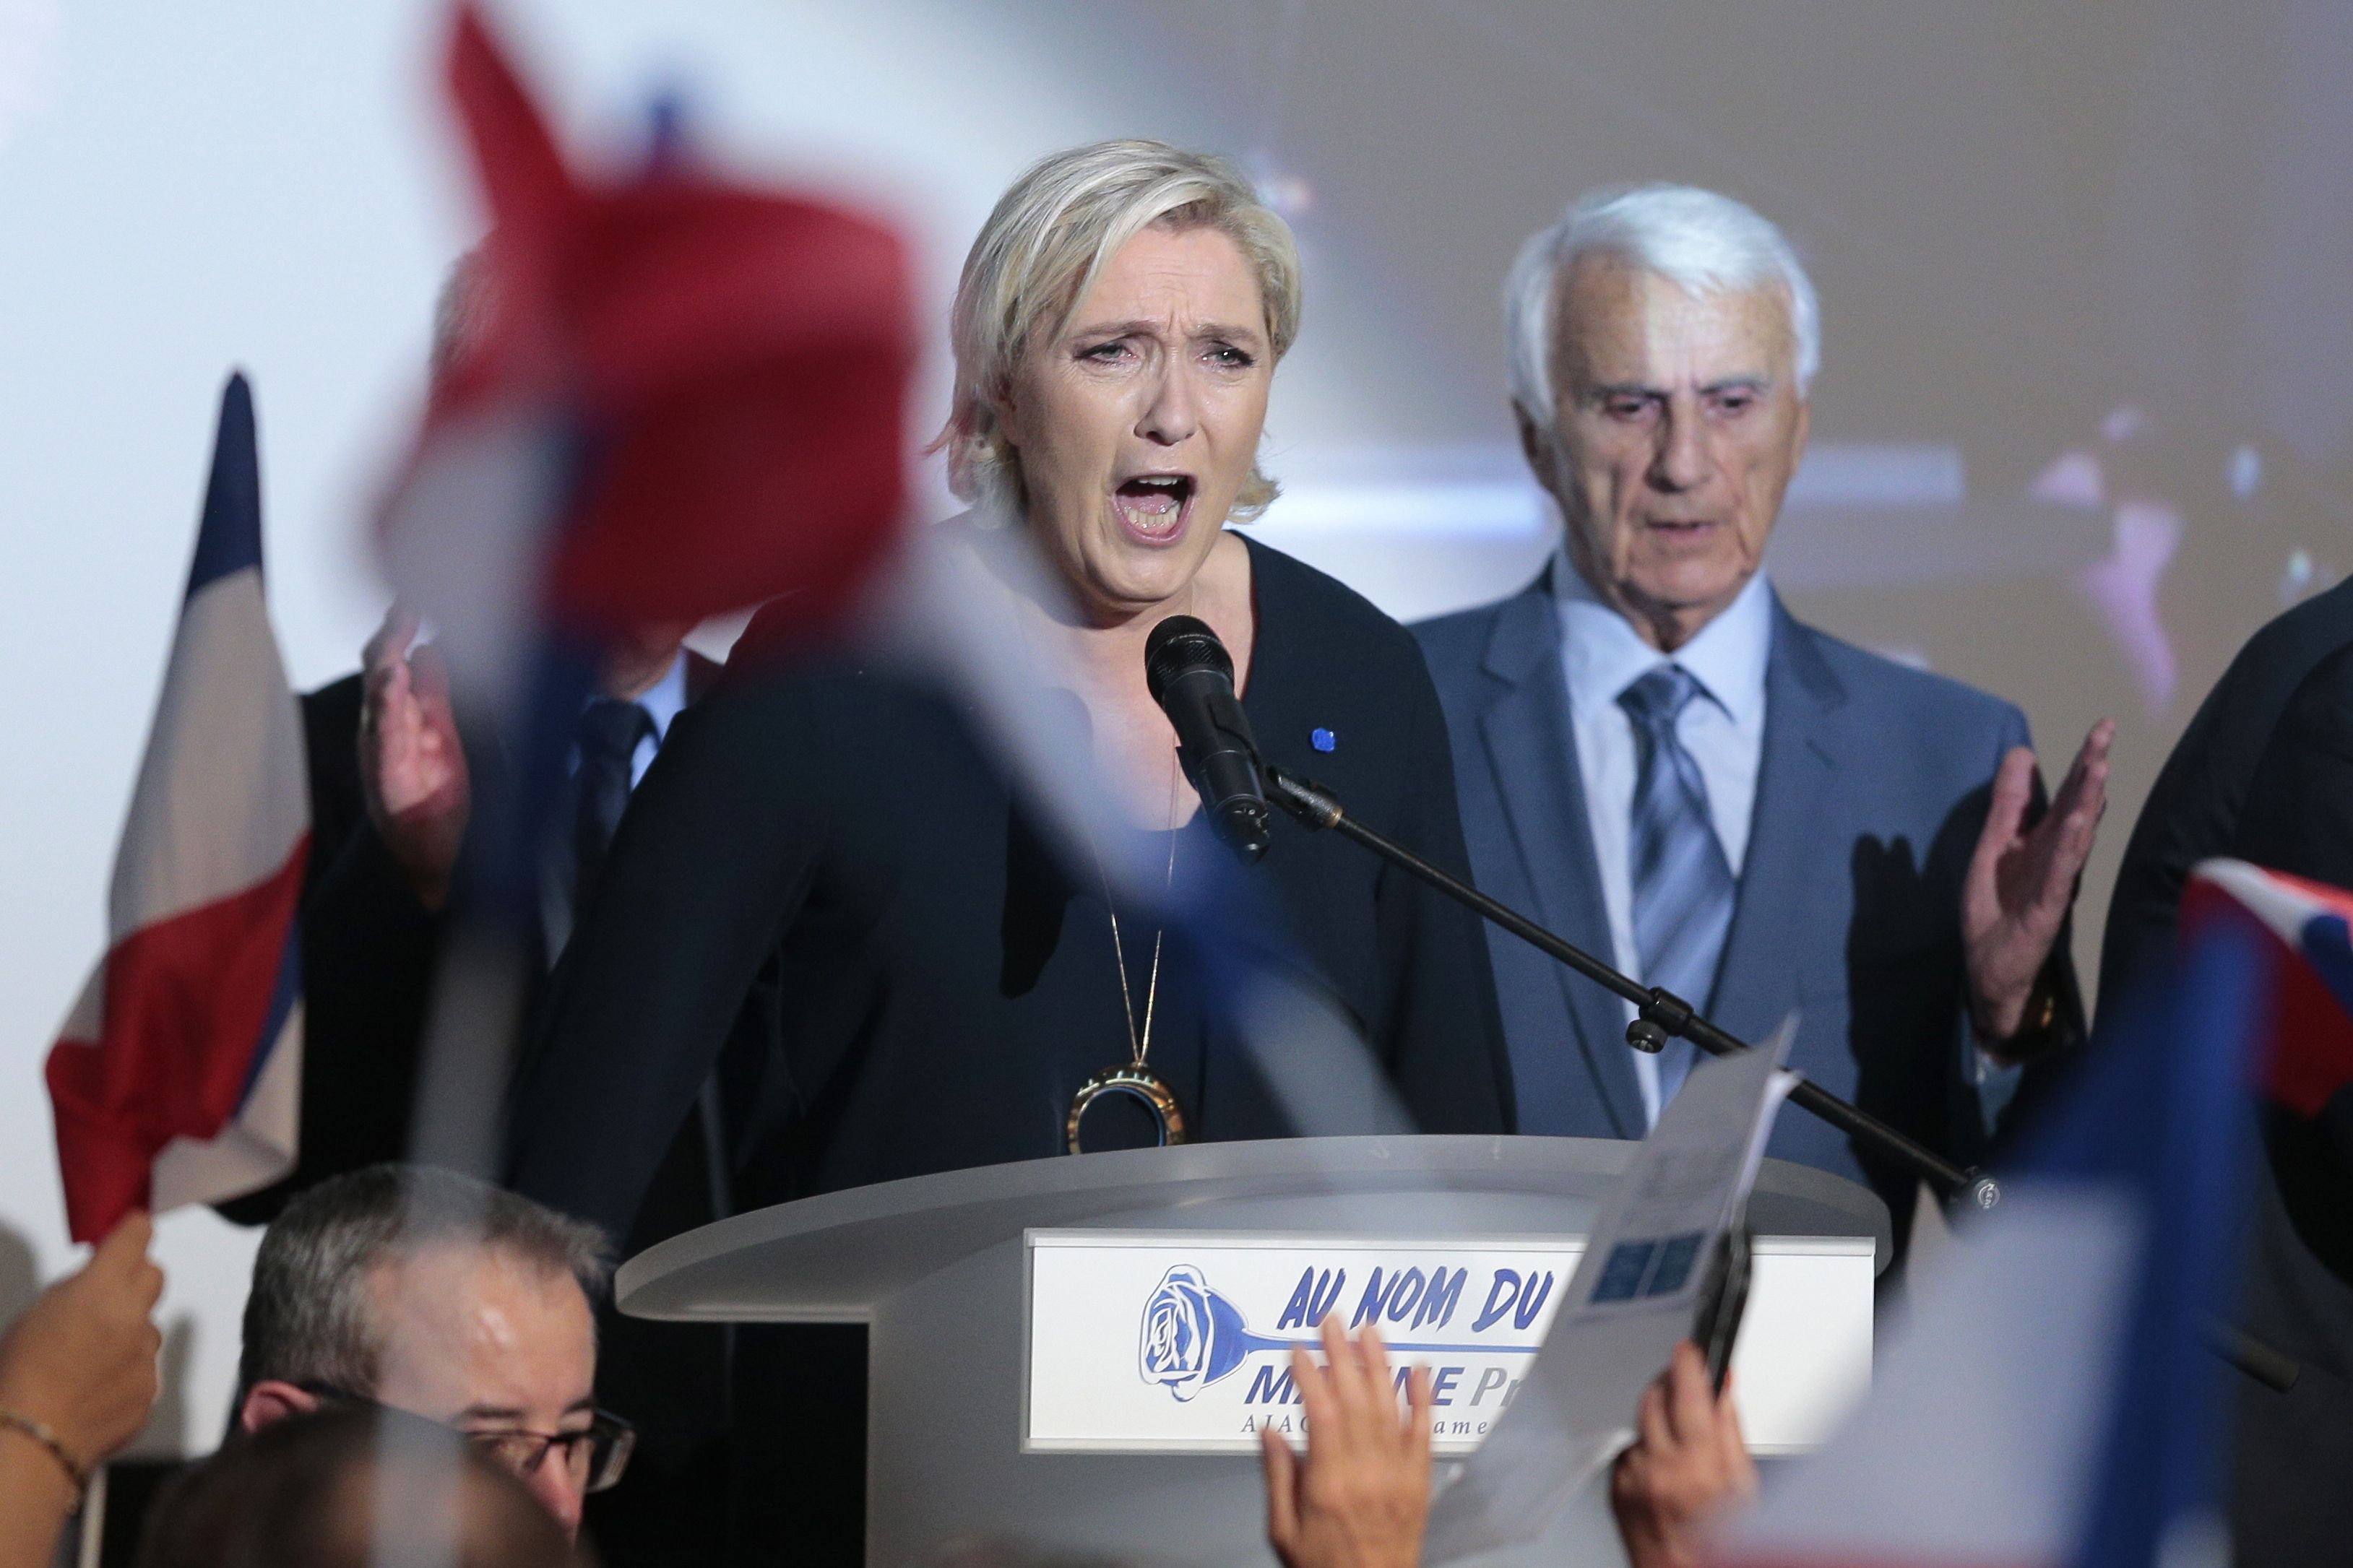 French presidential election candidate for the far-right Front National (FN) party Marine Le Pen delivers a speech during a campaign meeting at the Palais des Congres in Ajaccio on the French Mediterranean island of Corsica, on April 8, 2017.